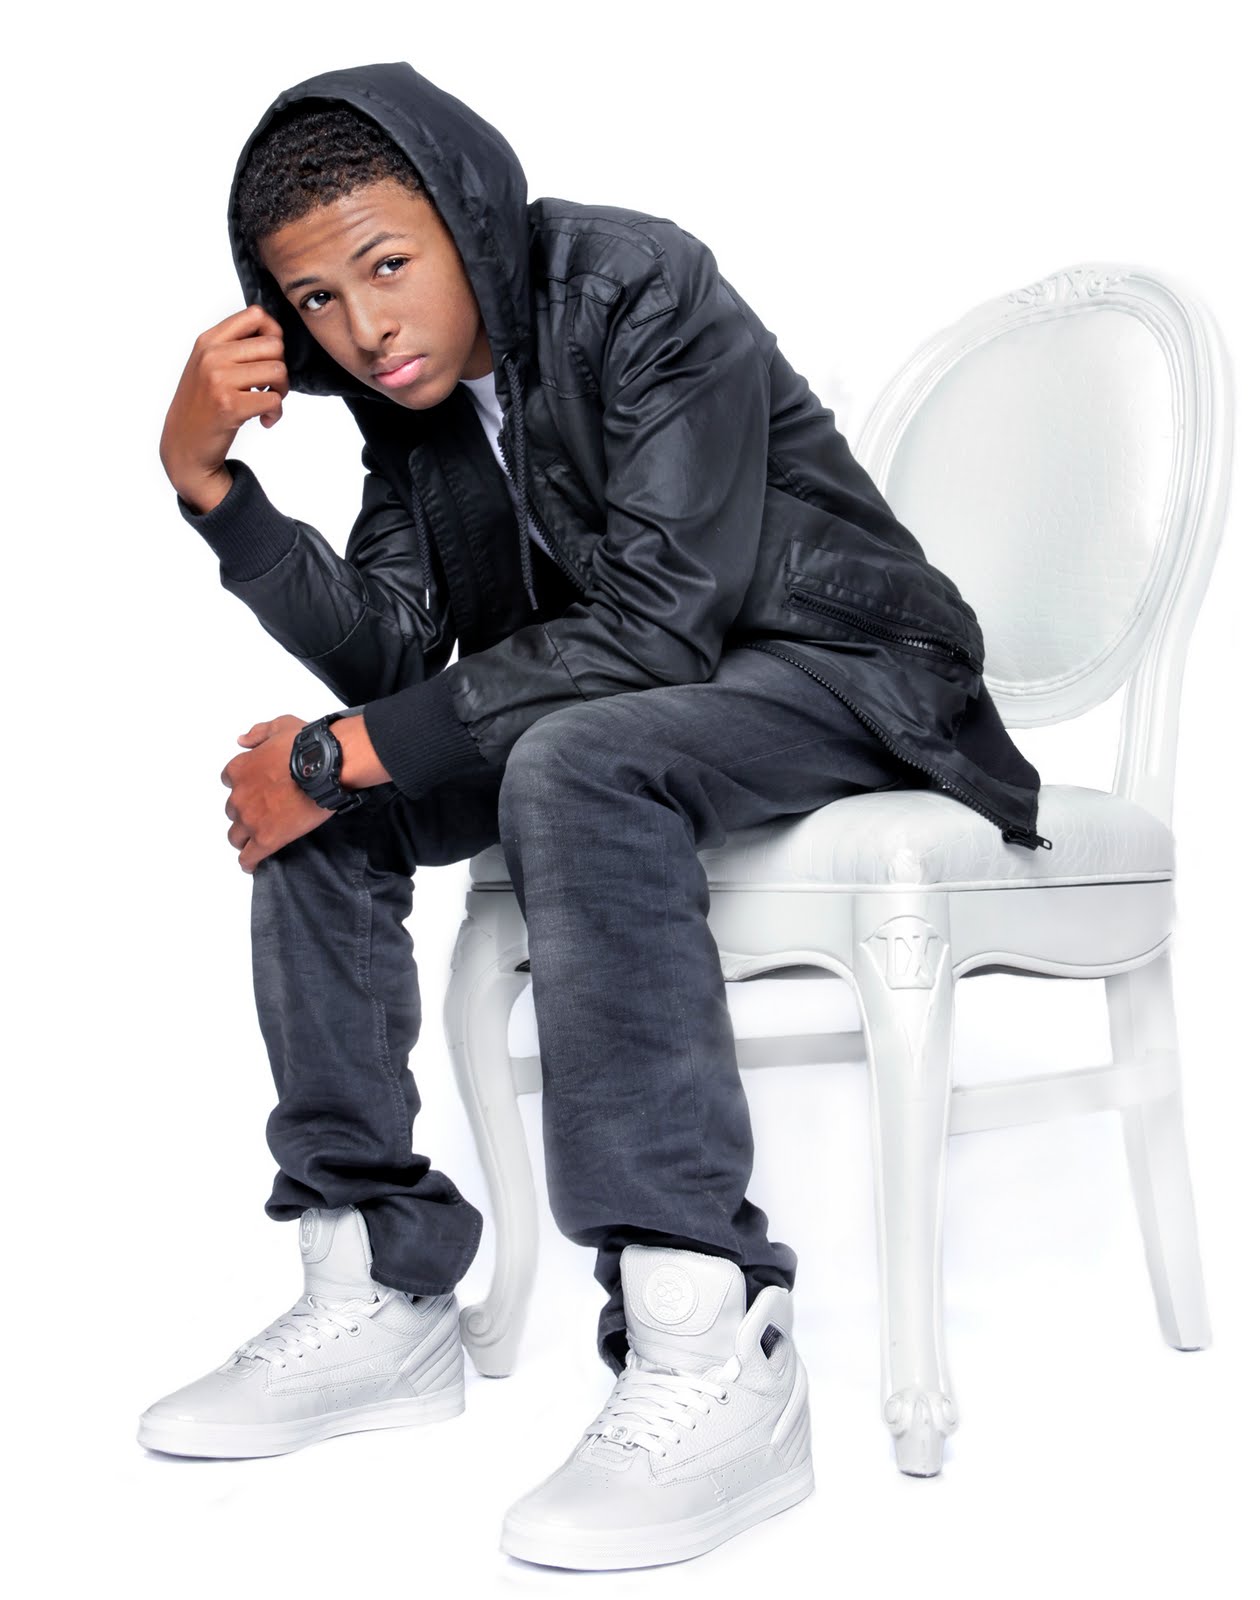 Diggy Simmons Releases Exceptional Debut Album